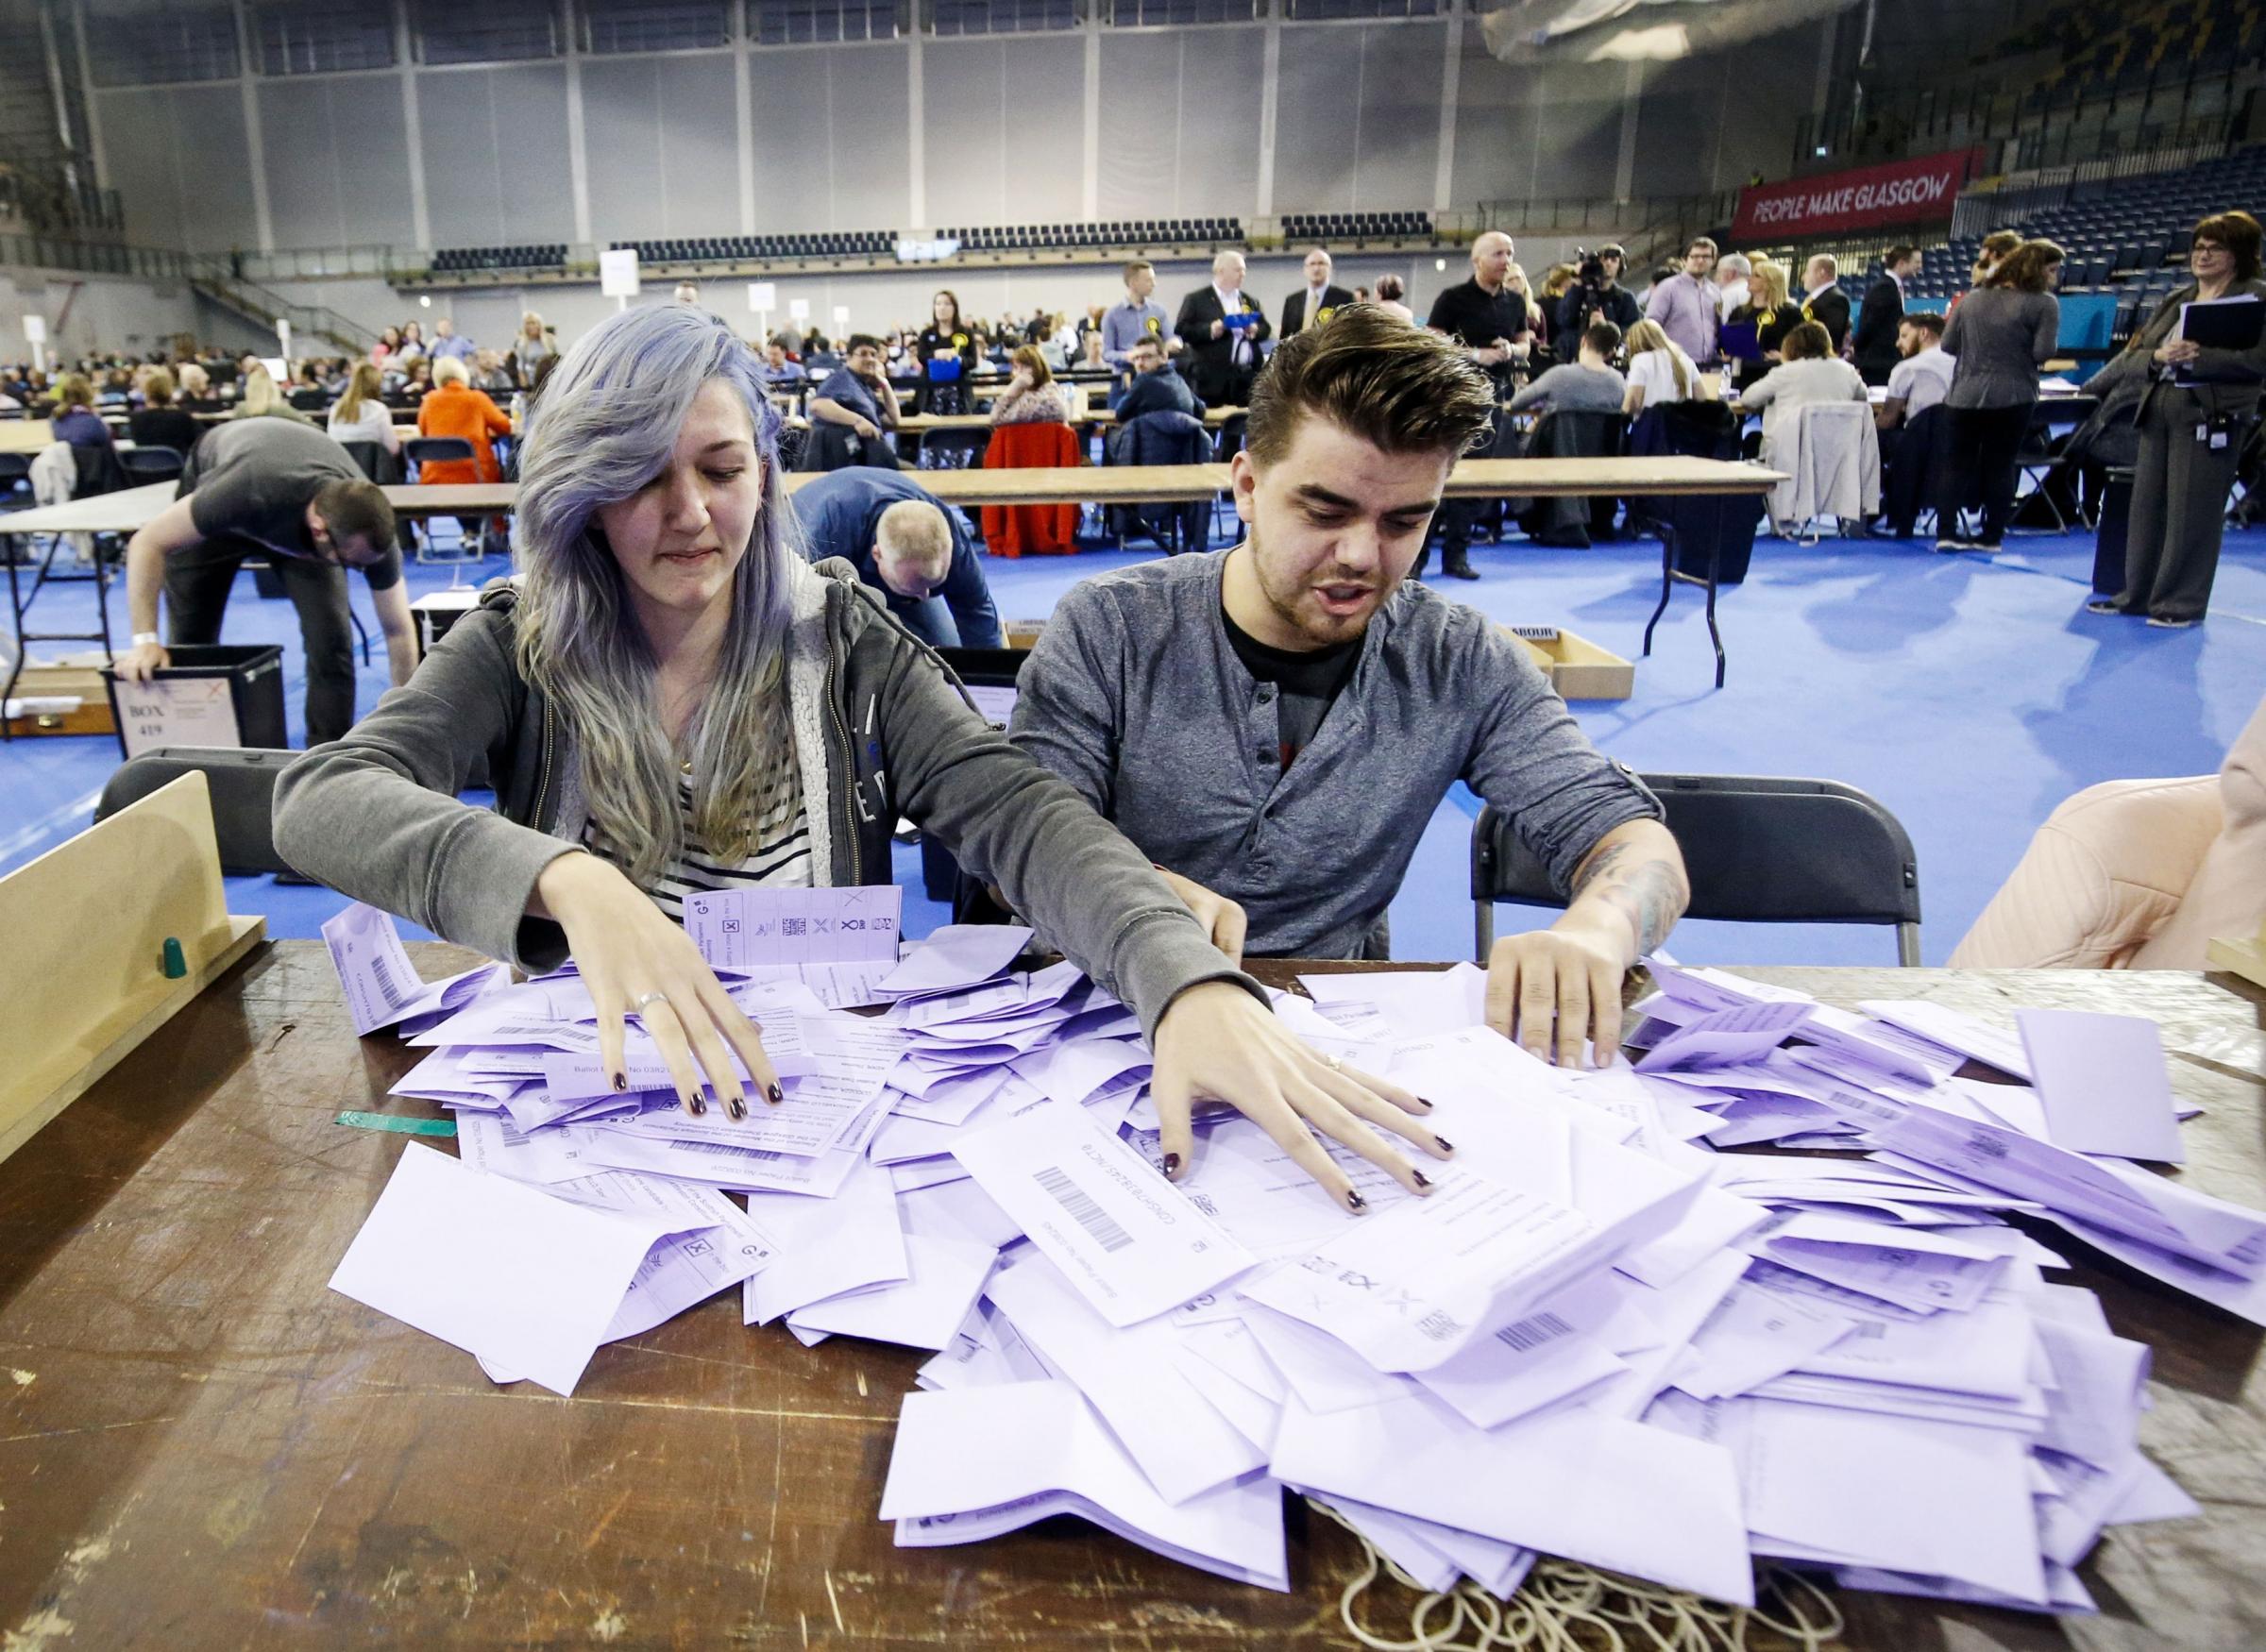 How will Covid affect vote counting and election results times?